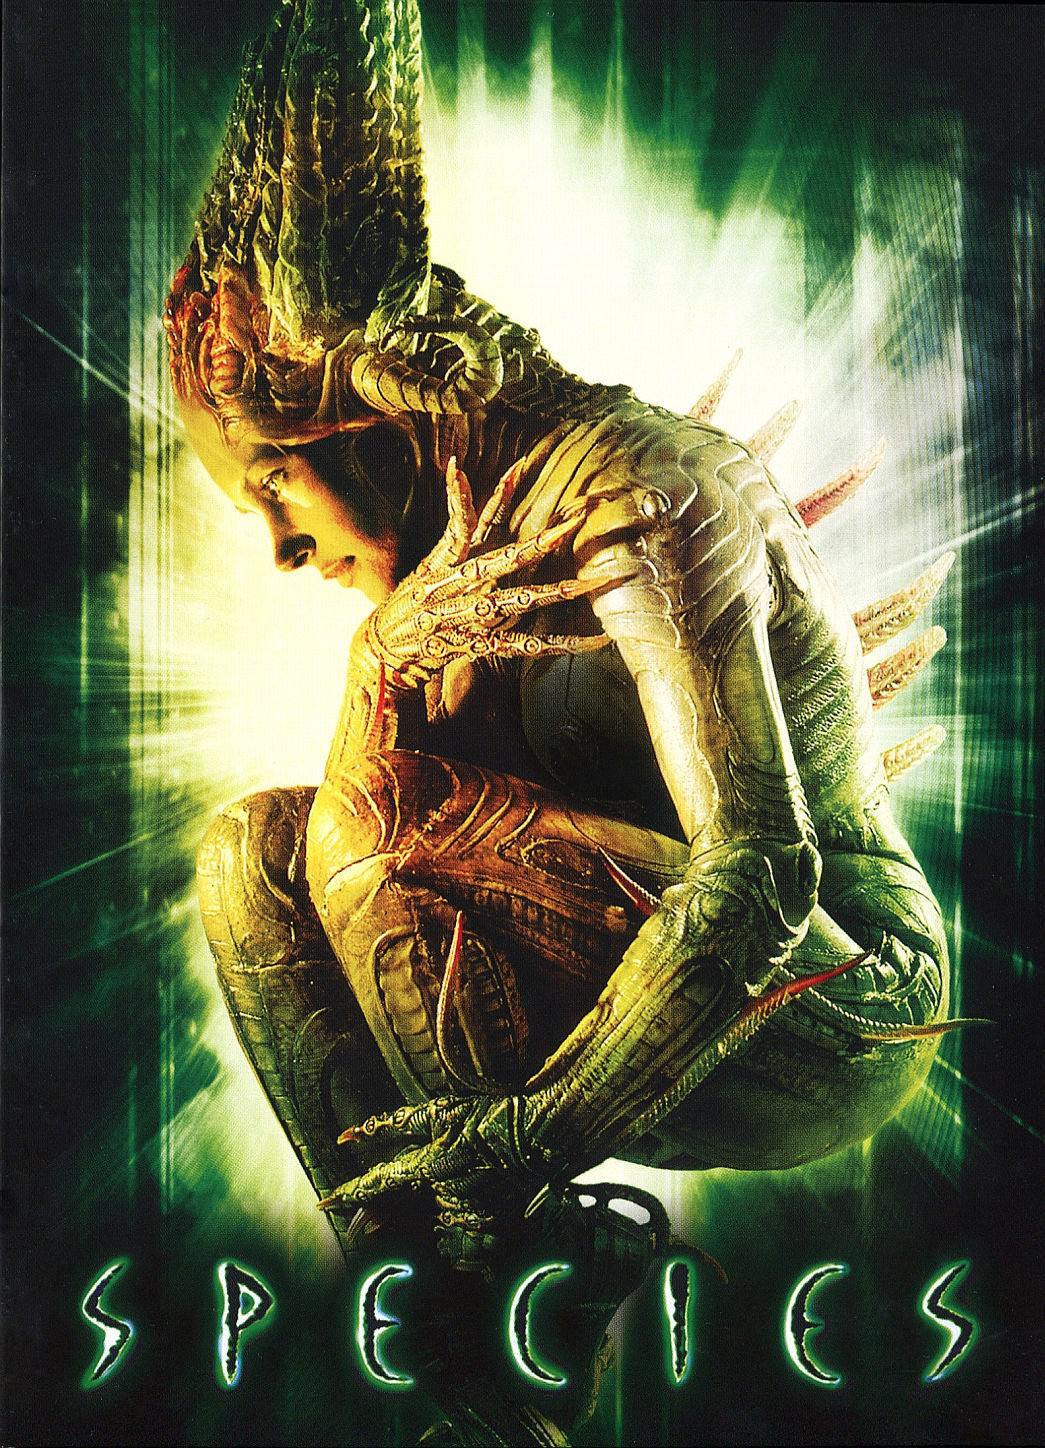 Poster for the movie "Species"